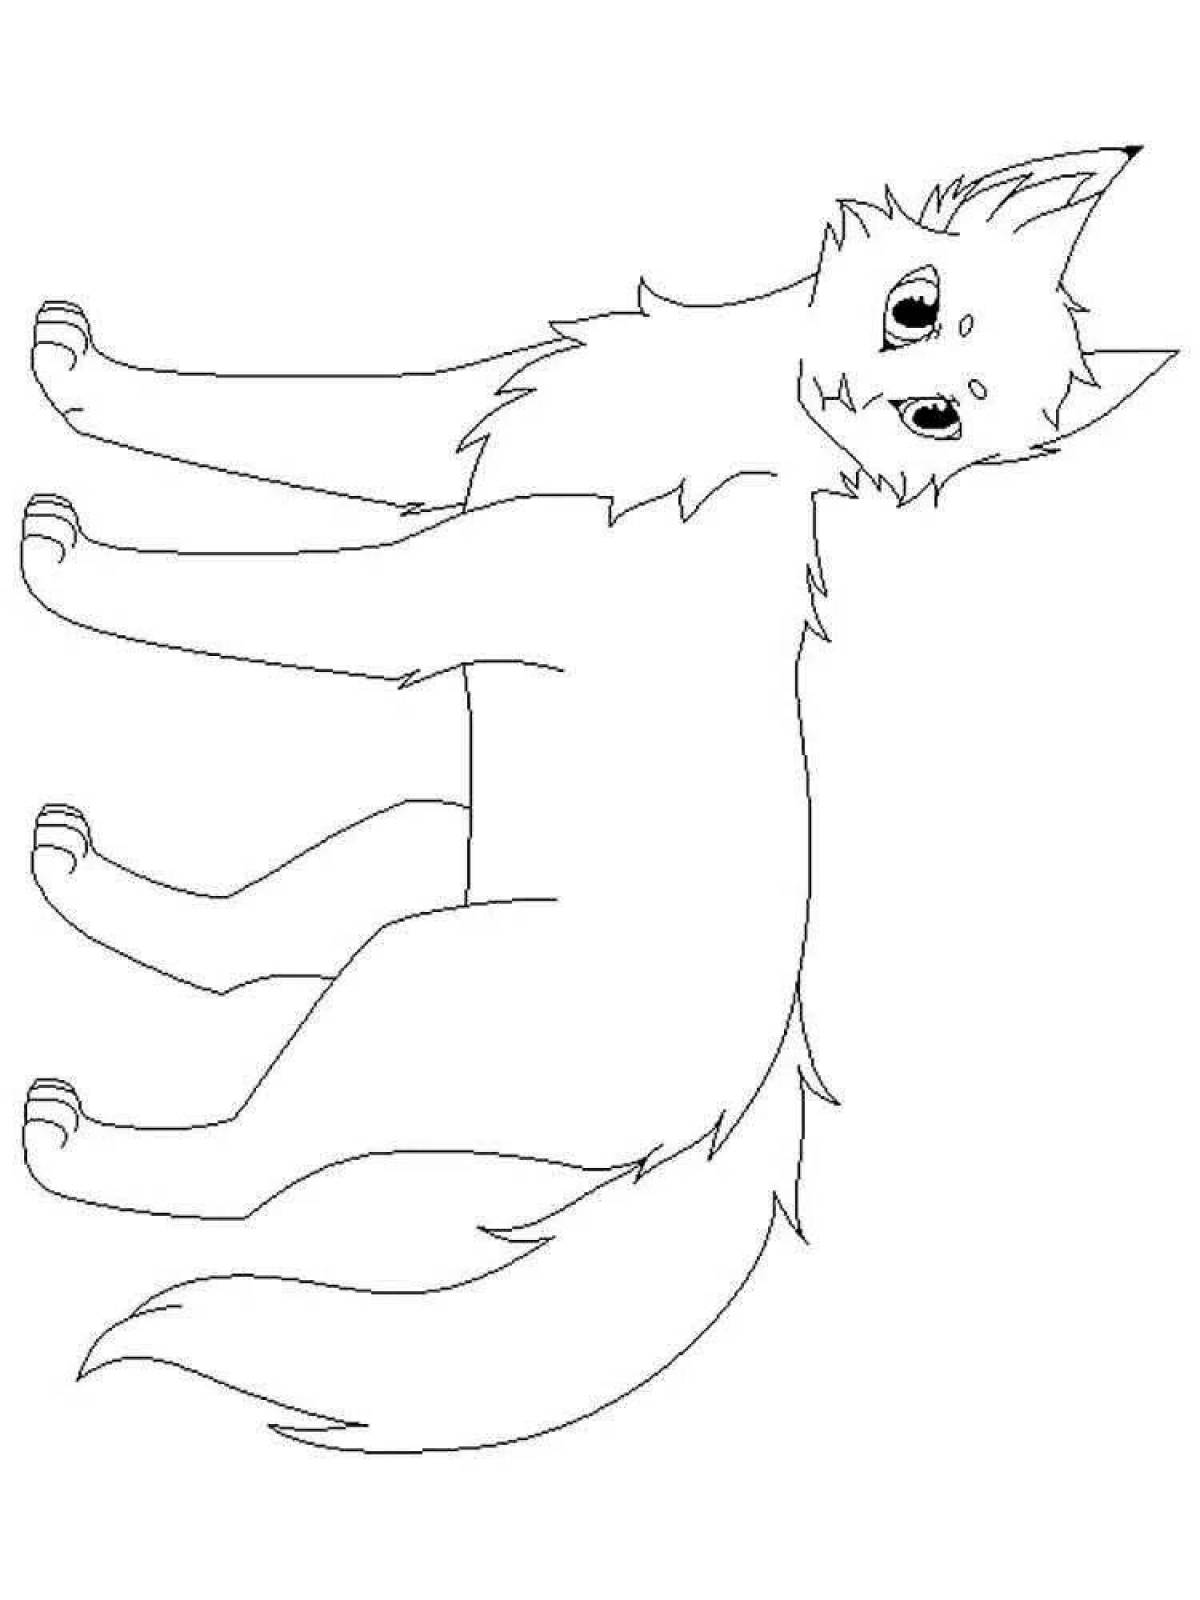 Elegant warrior cats scourge coloring page